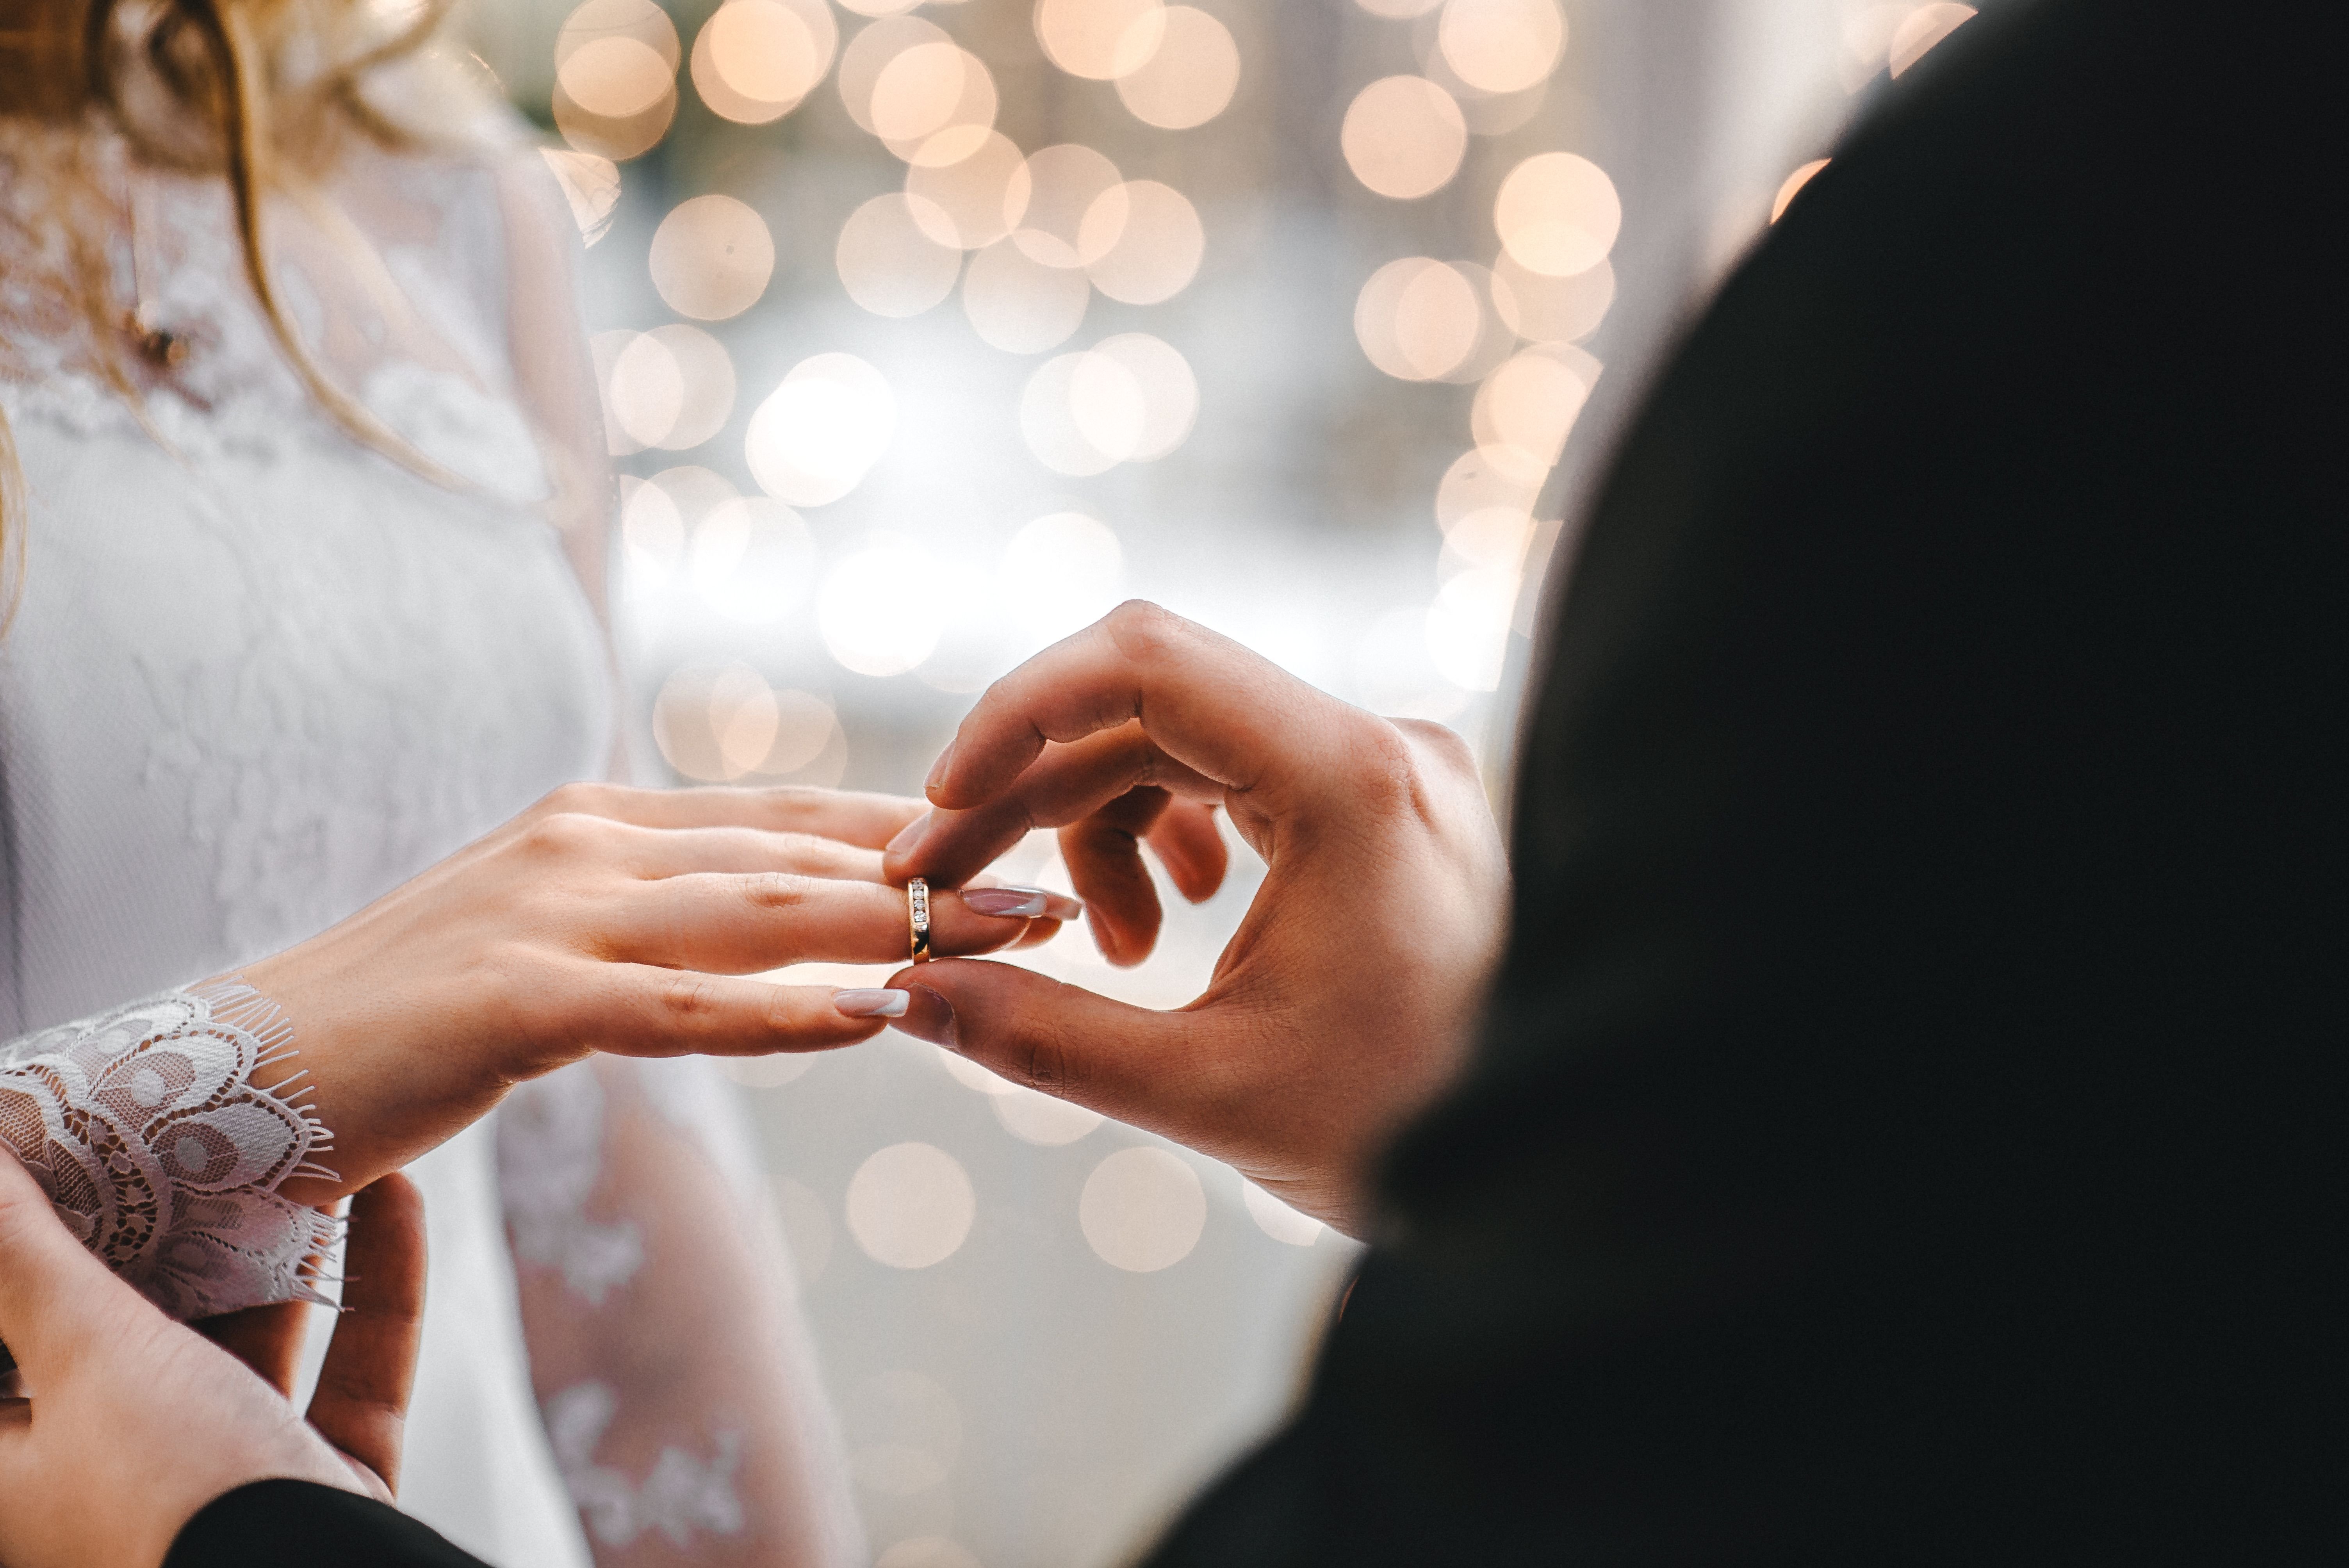 A groom puts the wedding ring on his wife's finger. | Source: Shutterstock